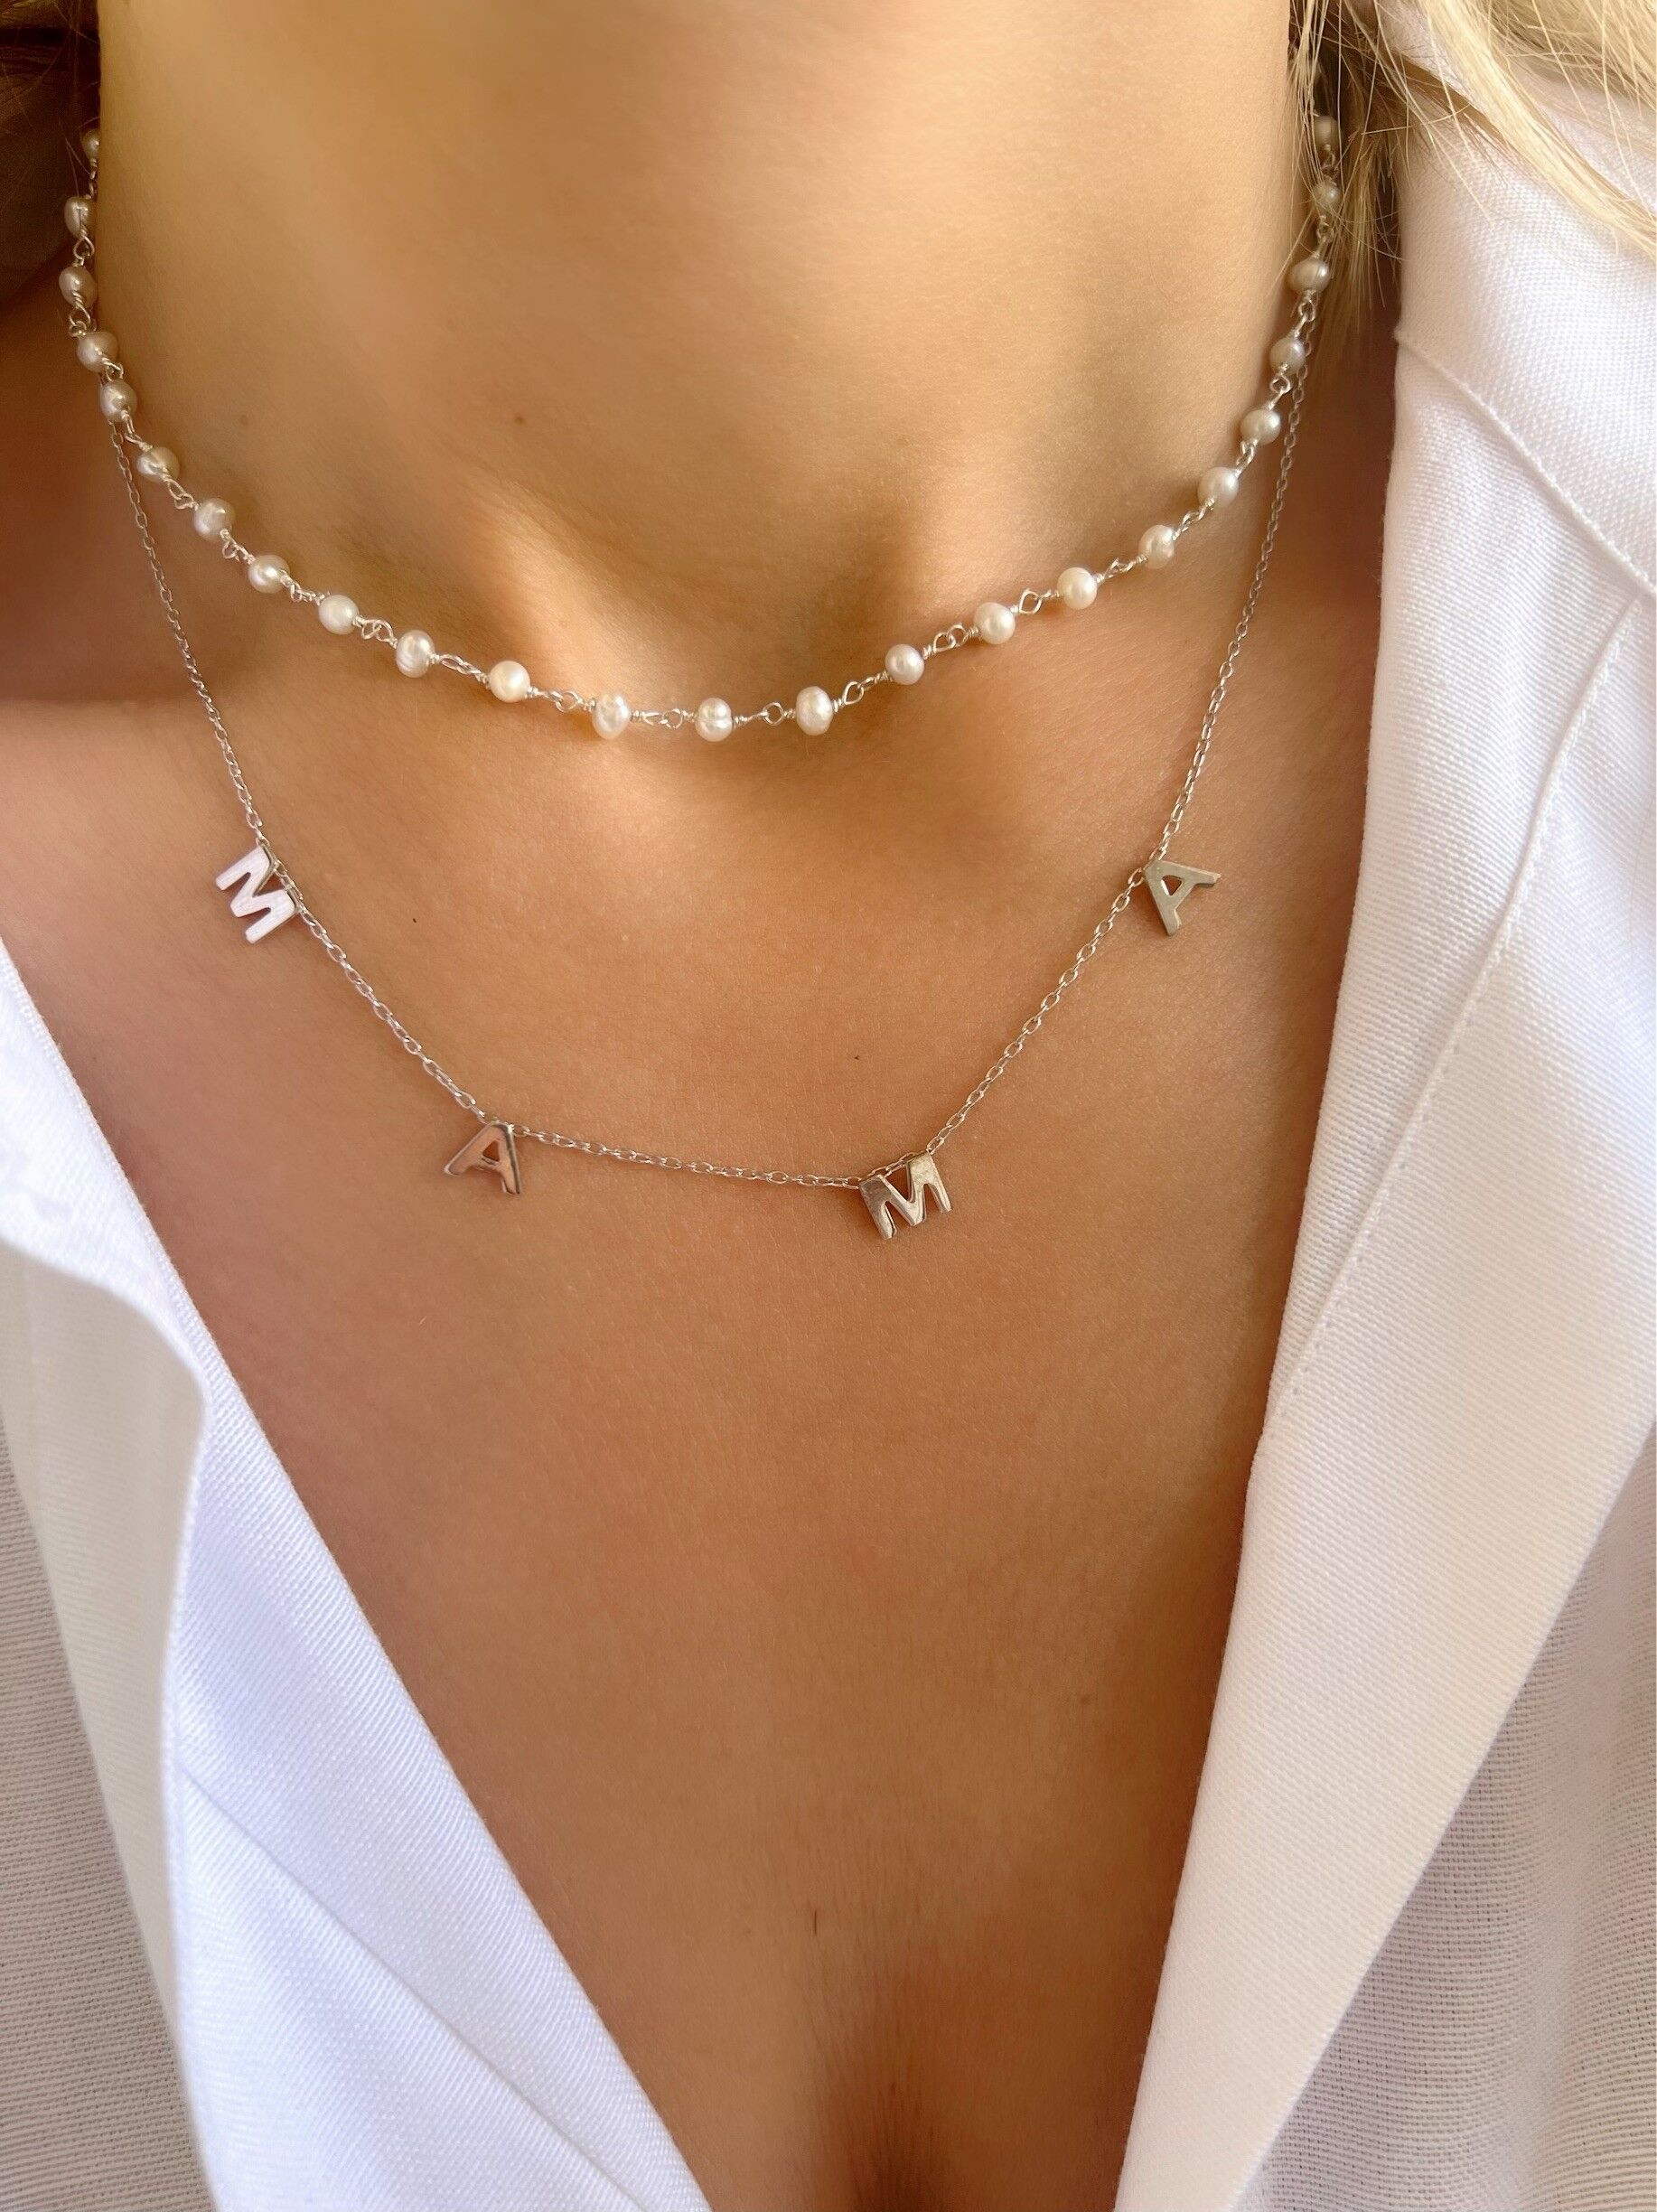 Buy Mother Gift, Mom Necklace Elegant Pearl With Different Sizes in Sterling  Silver, Birthday Gift, Party Necklace, Wedding Jewelry Wear Online in India  - Etsy